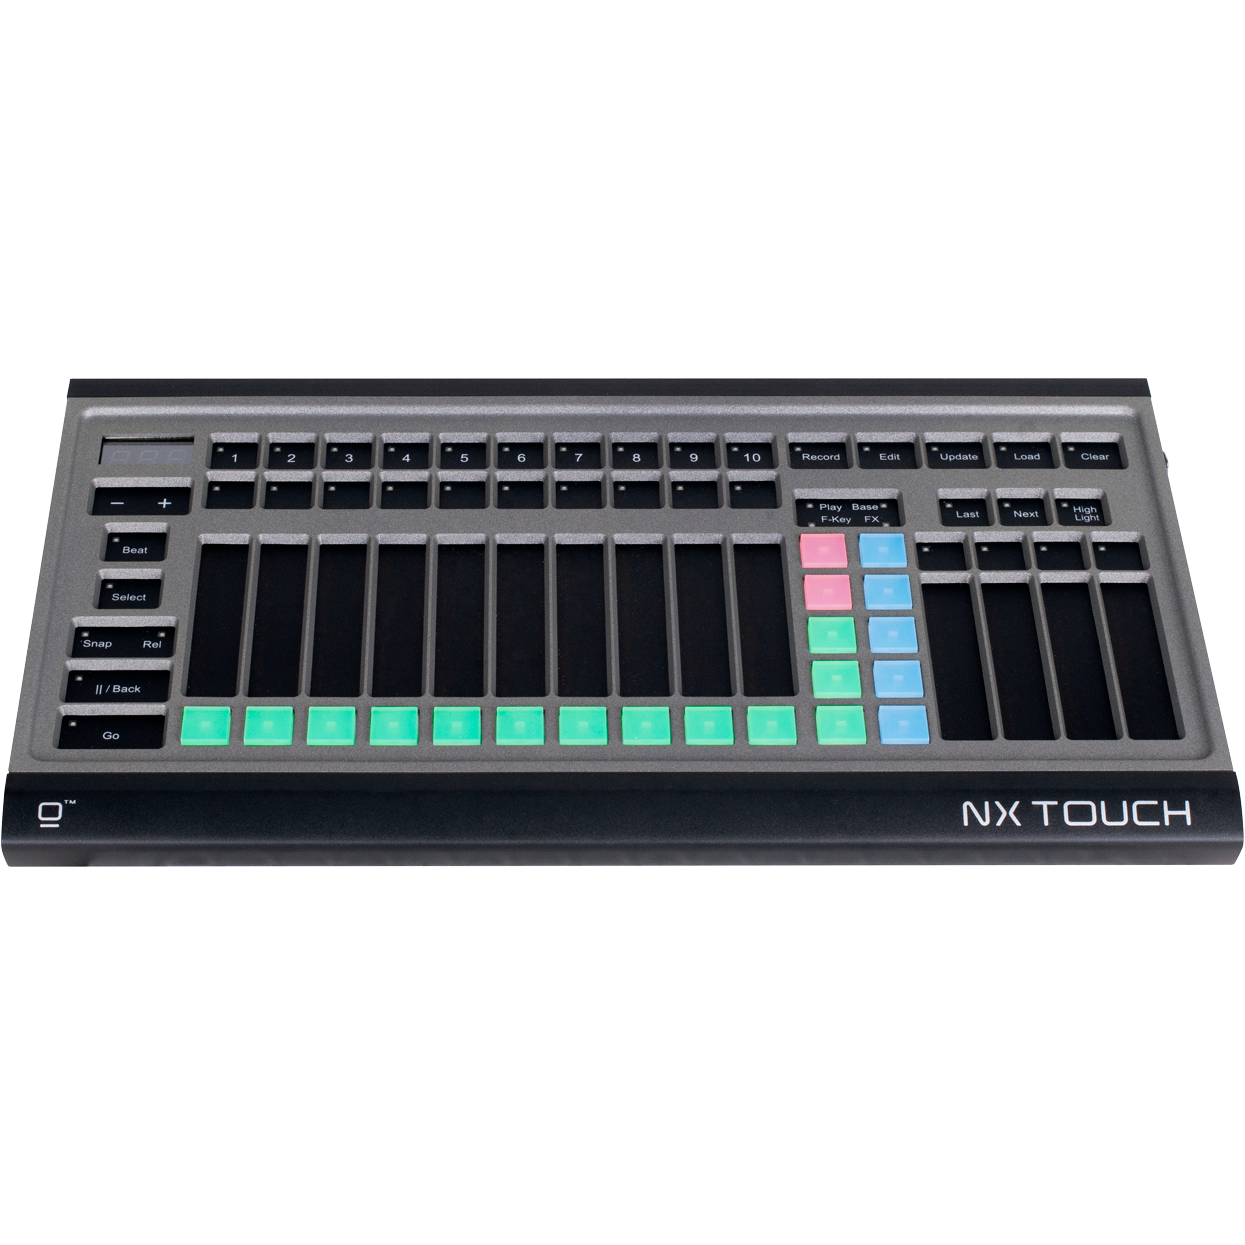 Obsidian NX Touch Lighting Controller tourPack with BYFP ipCase